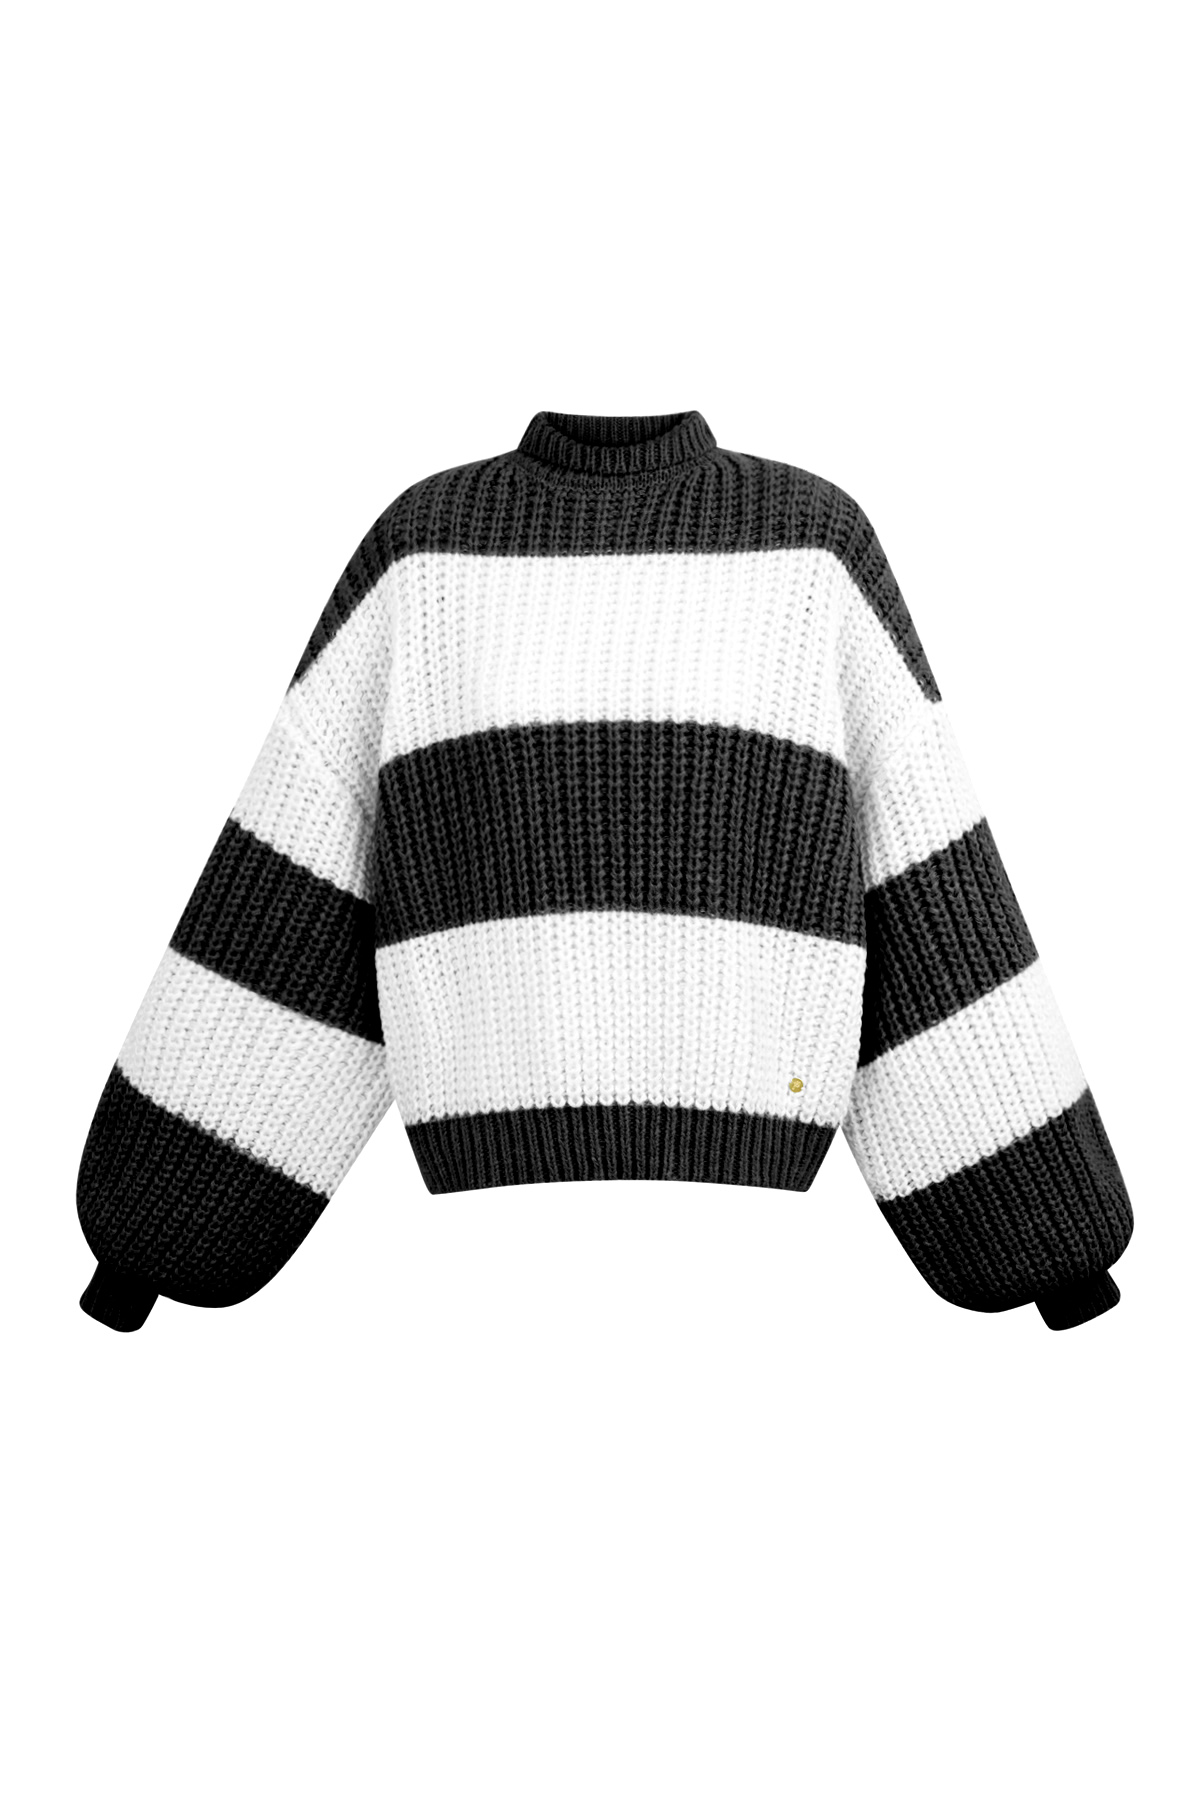 Warm knitted striped sweater - black and white h5 